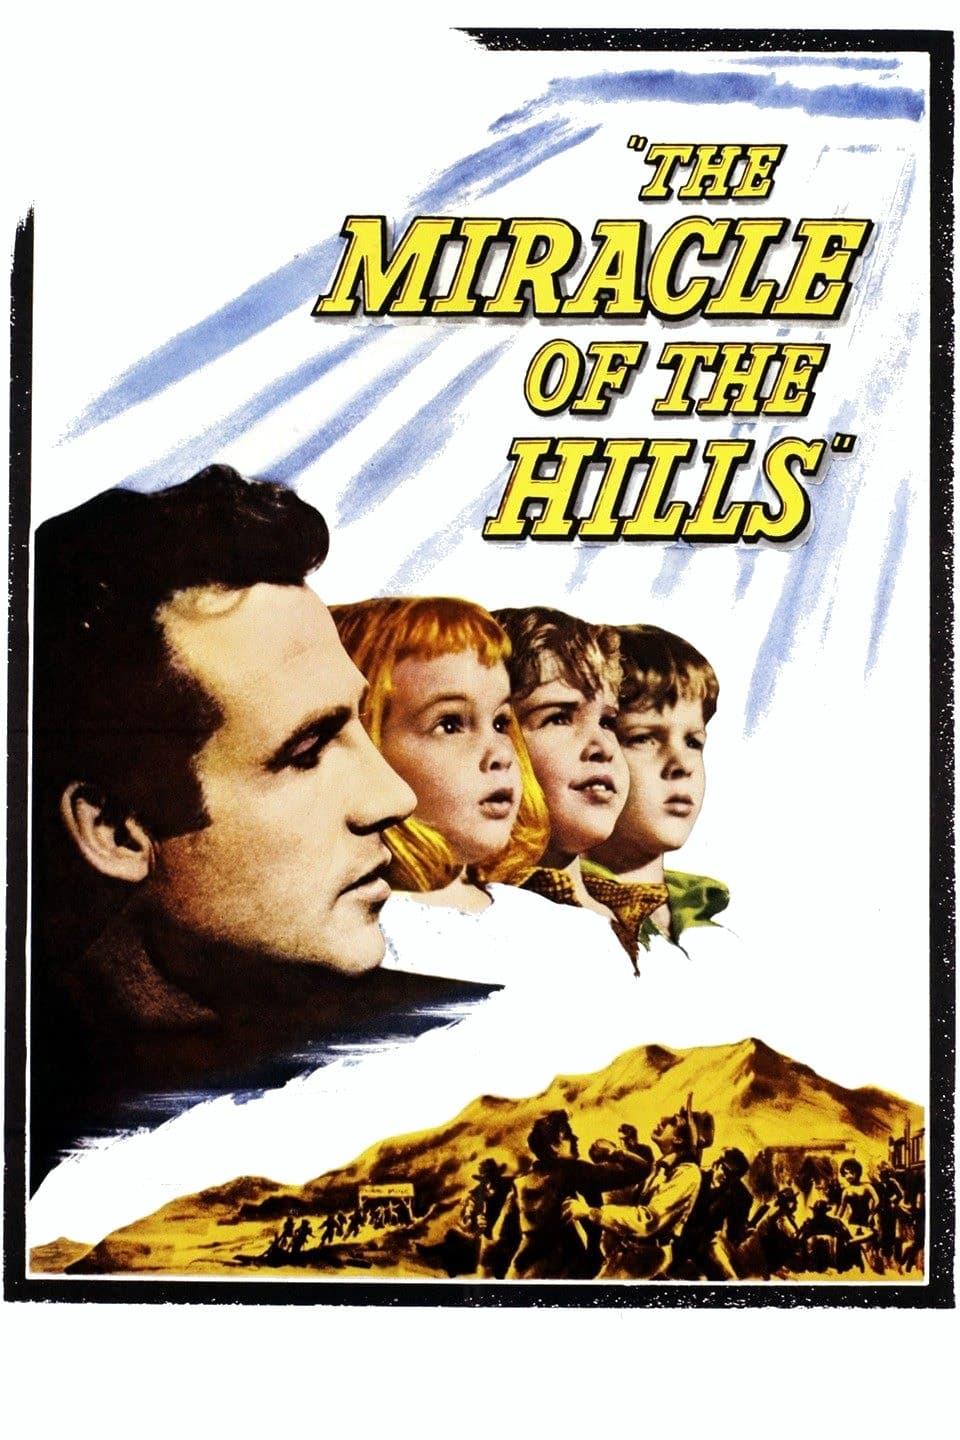 The Miracle of the Hills poster